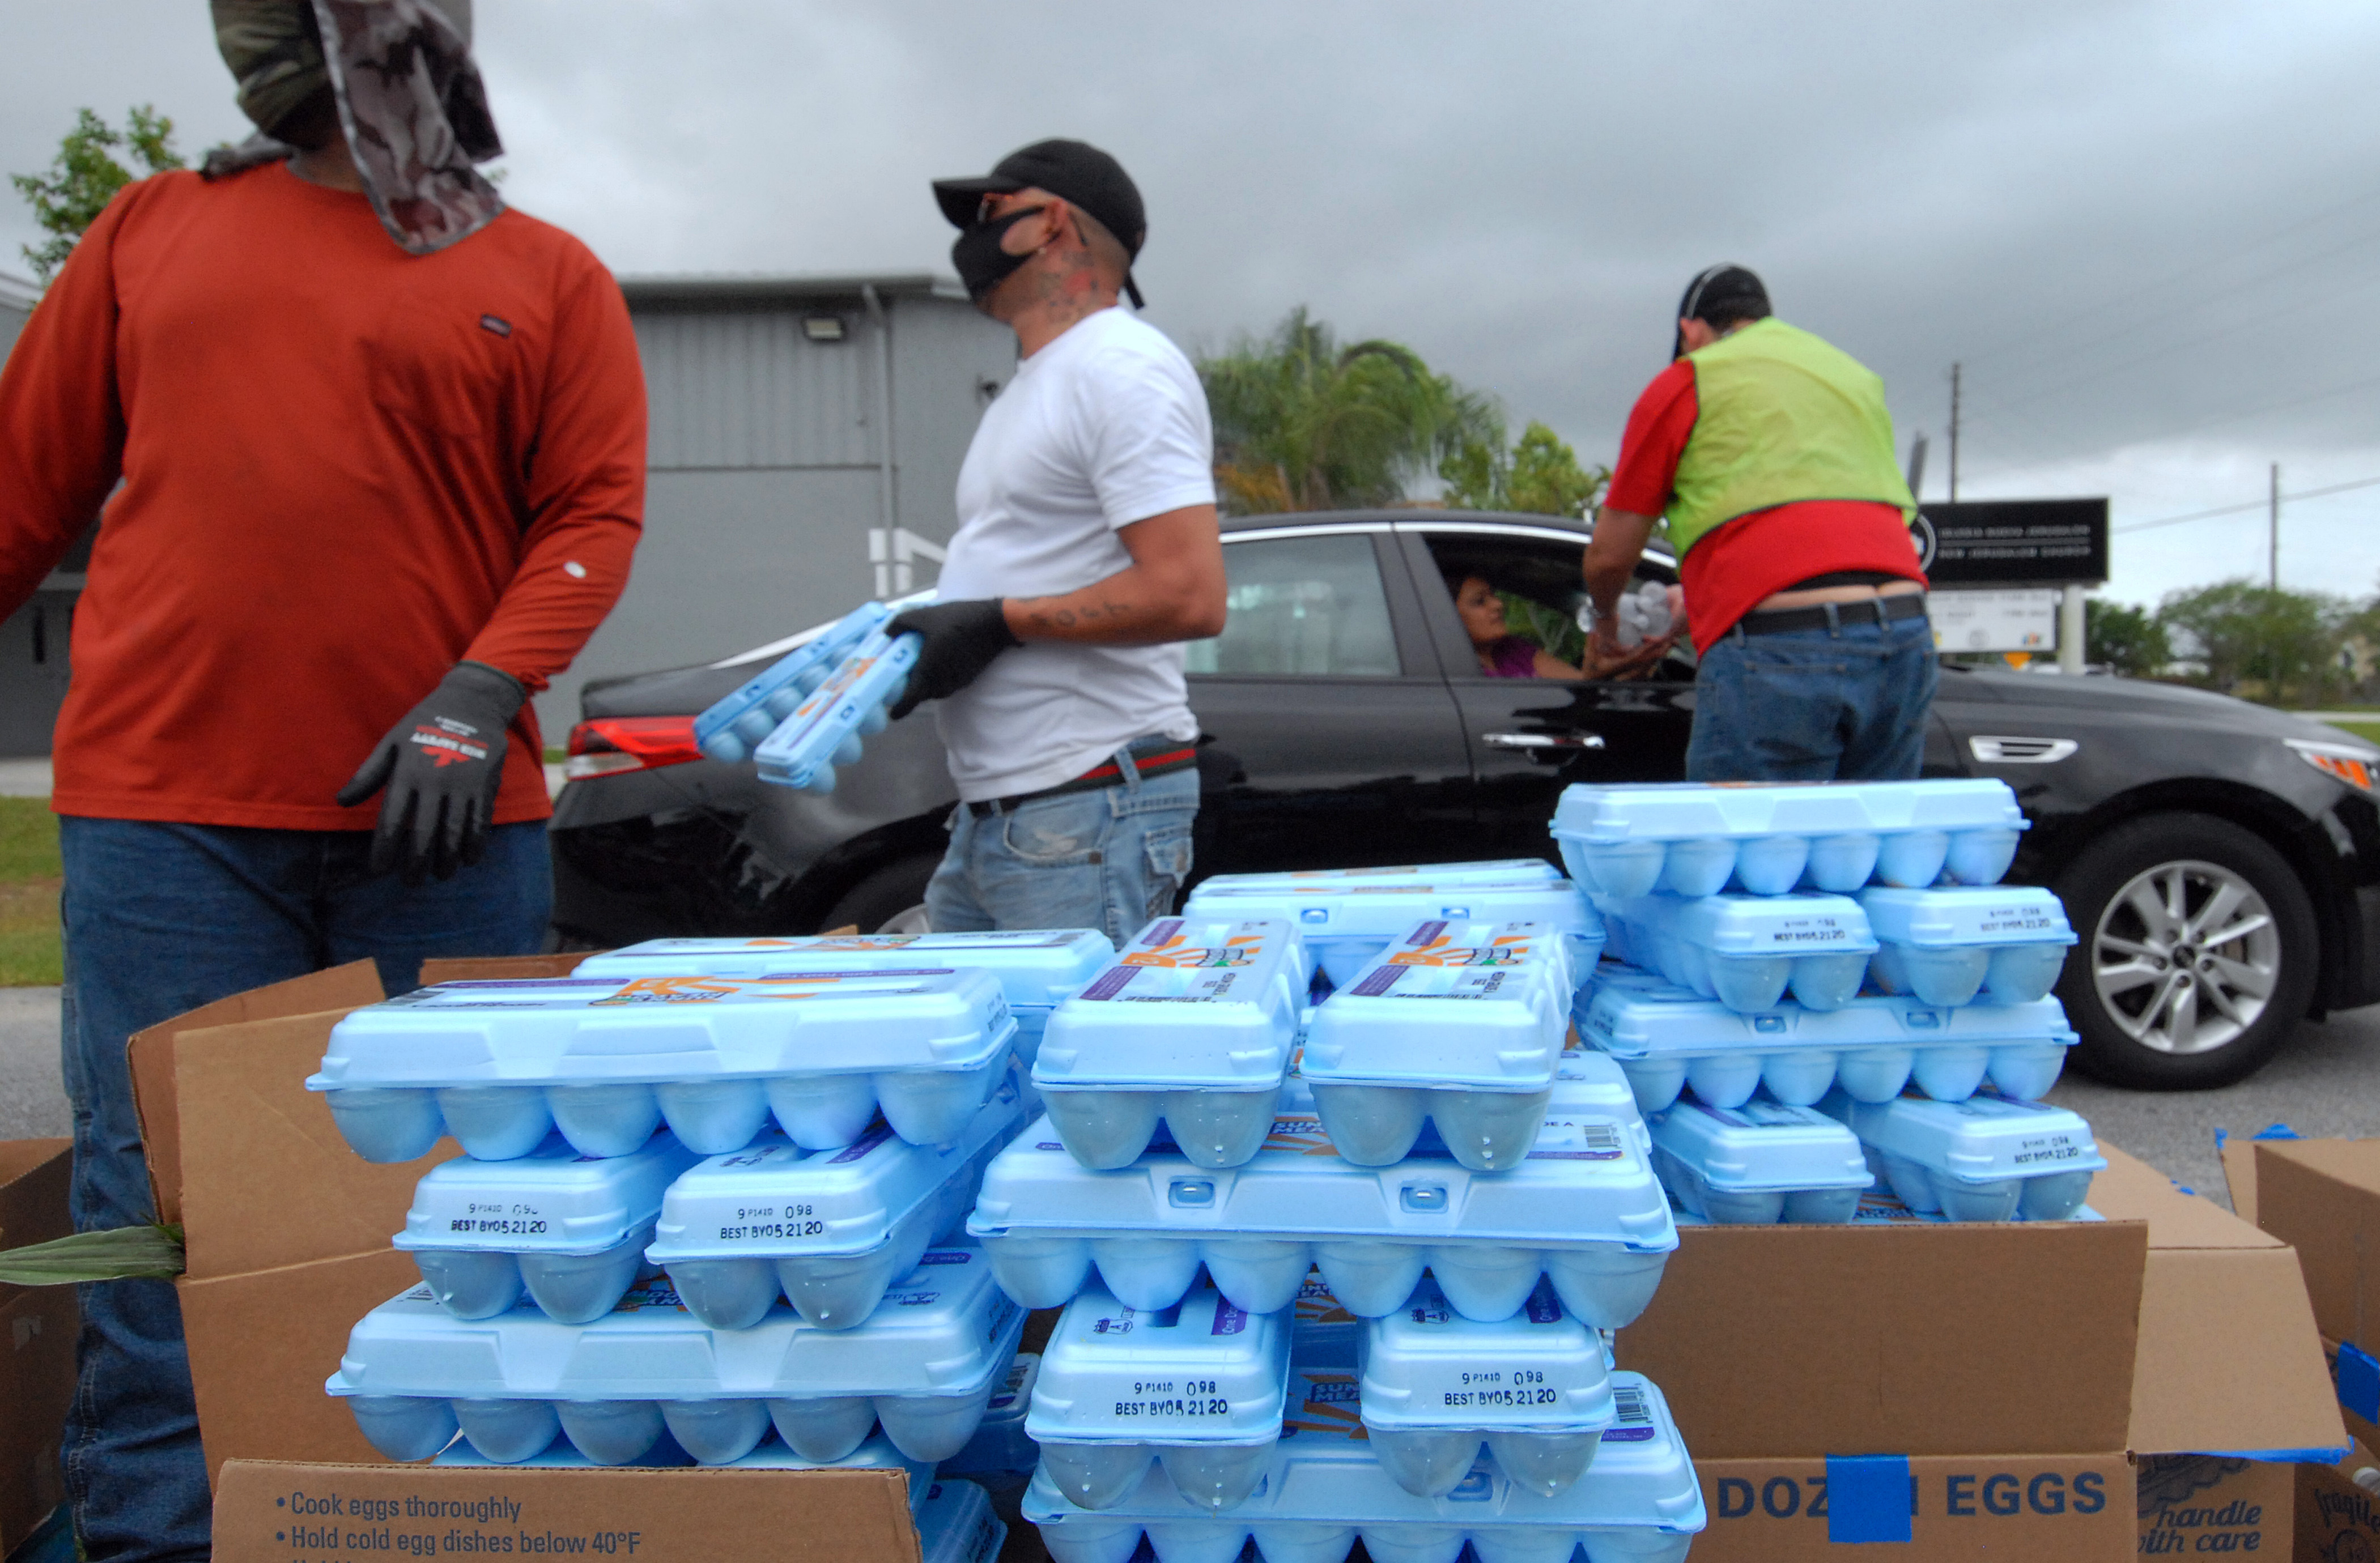 Volunteers distribute eggs from the Second Harvest Food Bank of Central Florida to needy families at a drive through event on April 17, 2020 in Kissimmee, Florida.